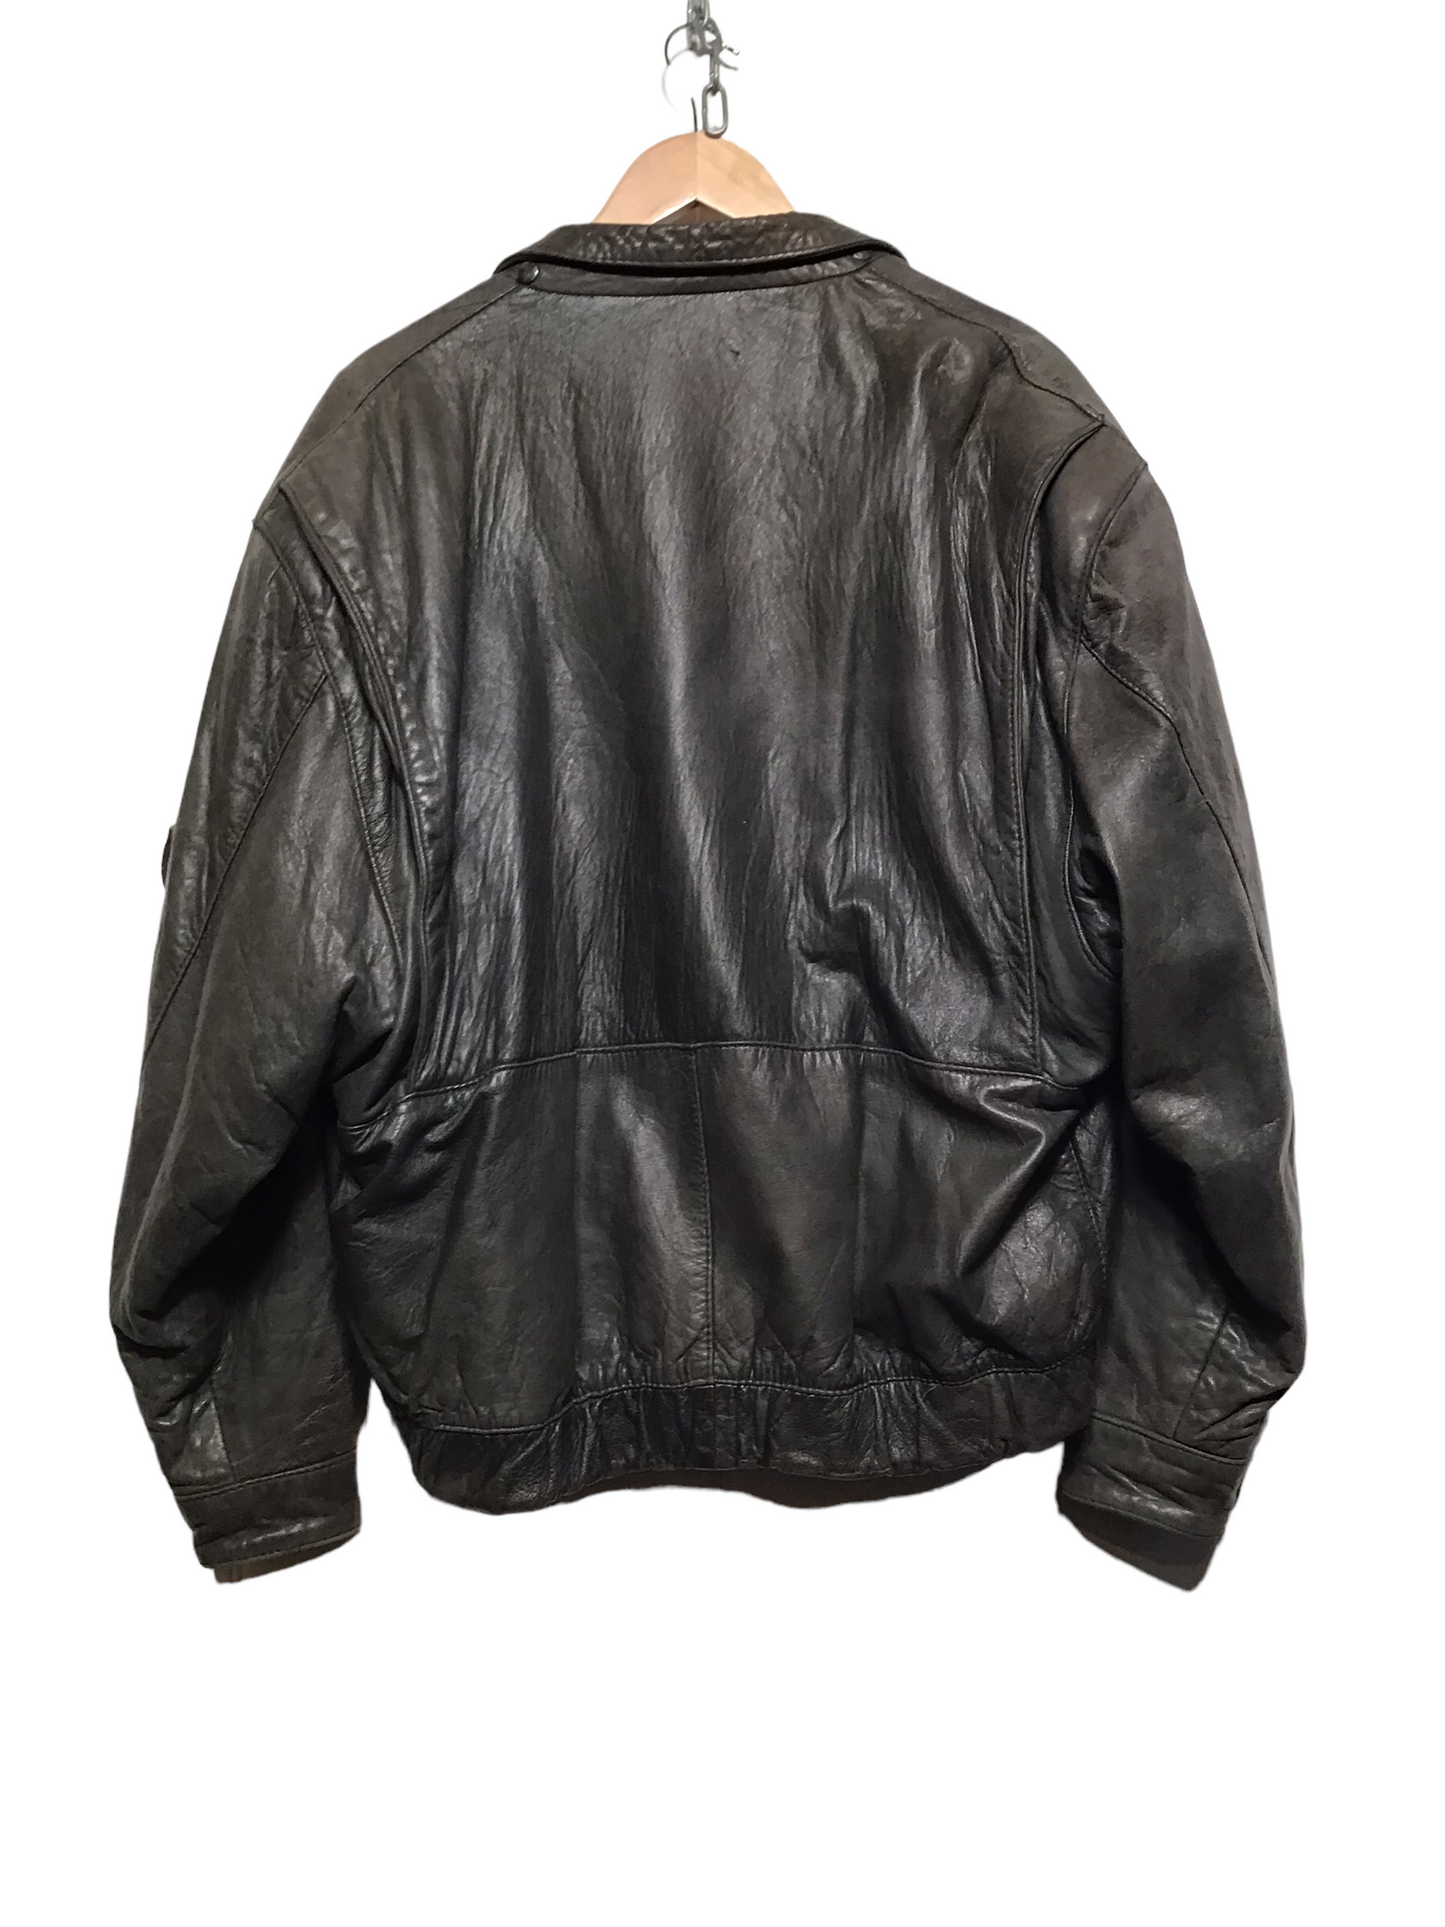 Brown Leather Jacket (Size XL)